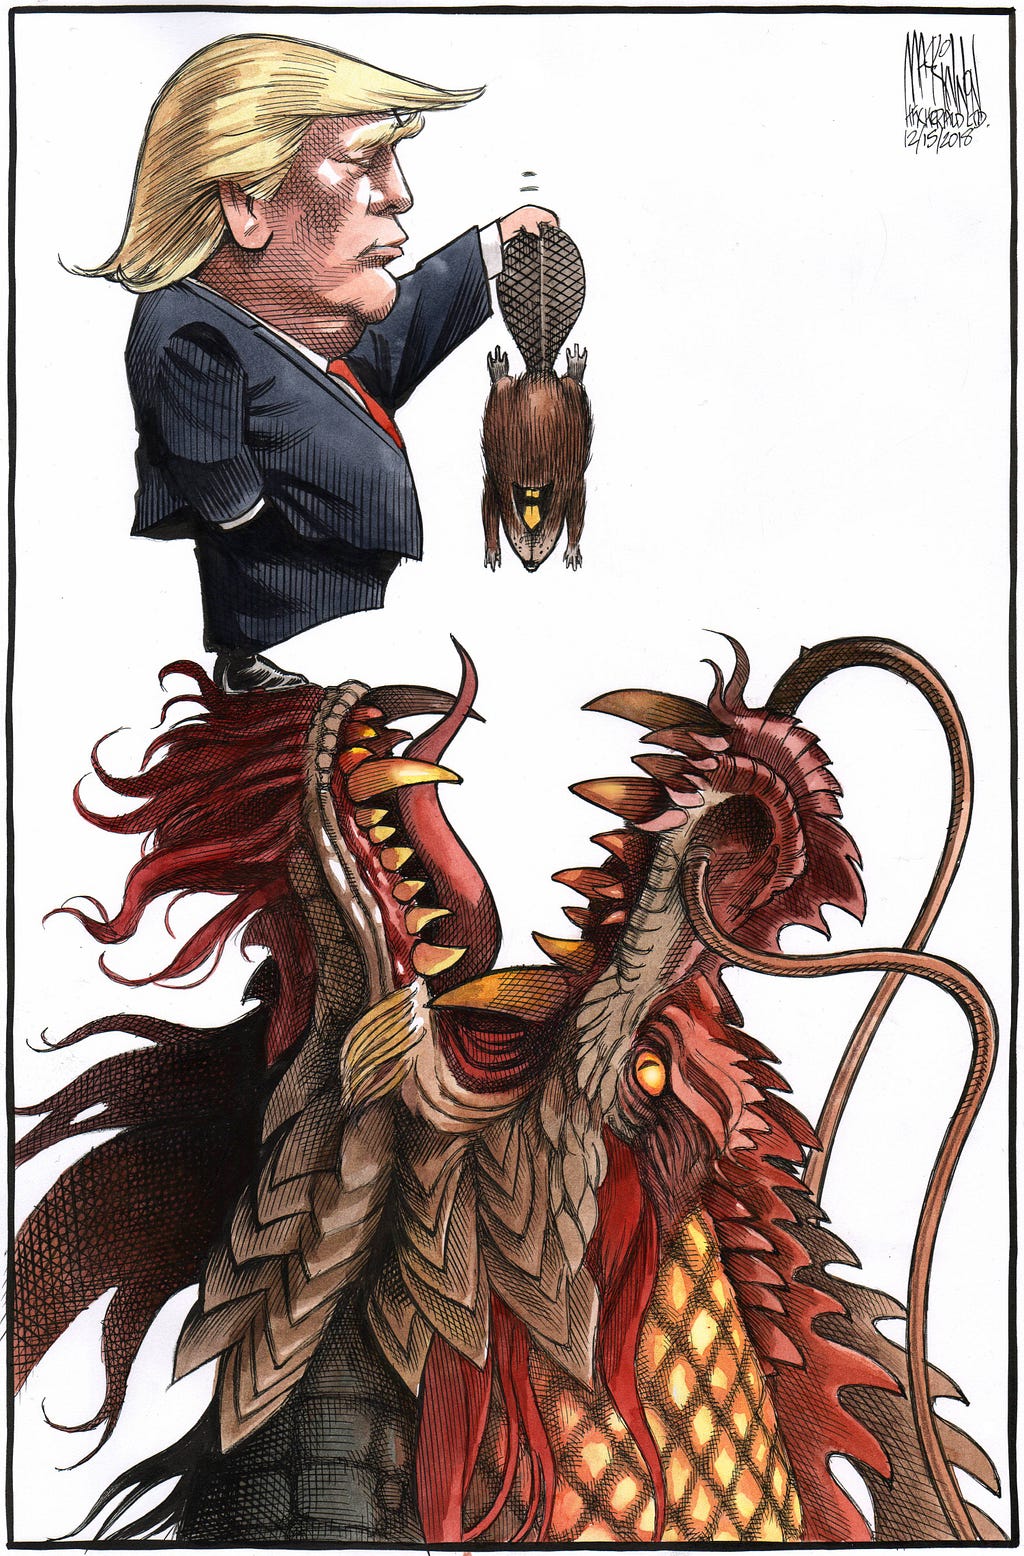 [Trump dangles a Canadian beaver over the mouth of a Chinese dragon] (n.d.) Retrieved [June 13, 2020] from https://www.nation